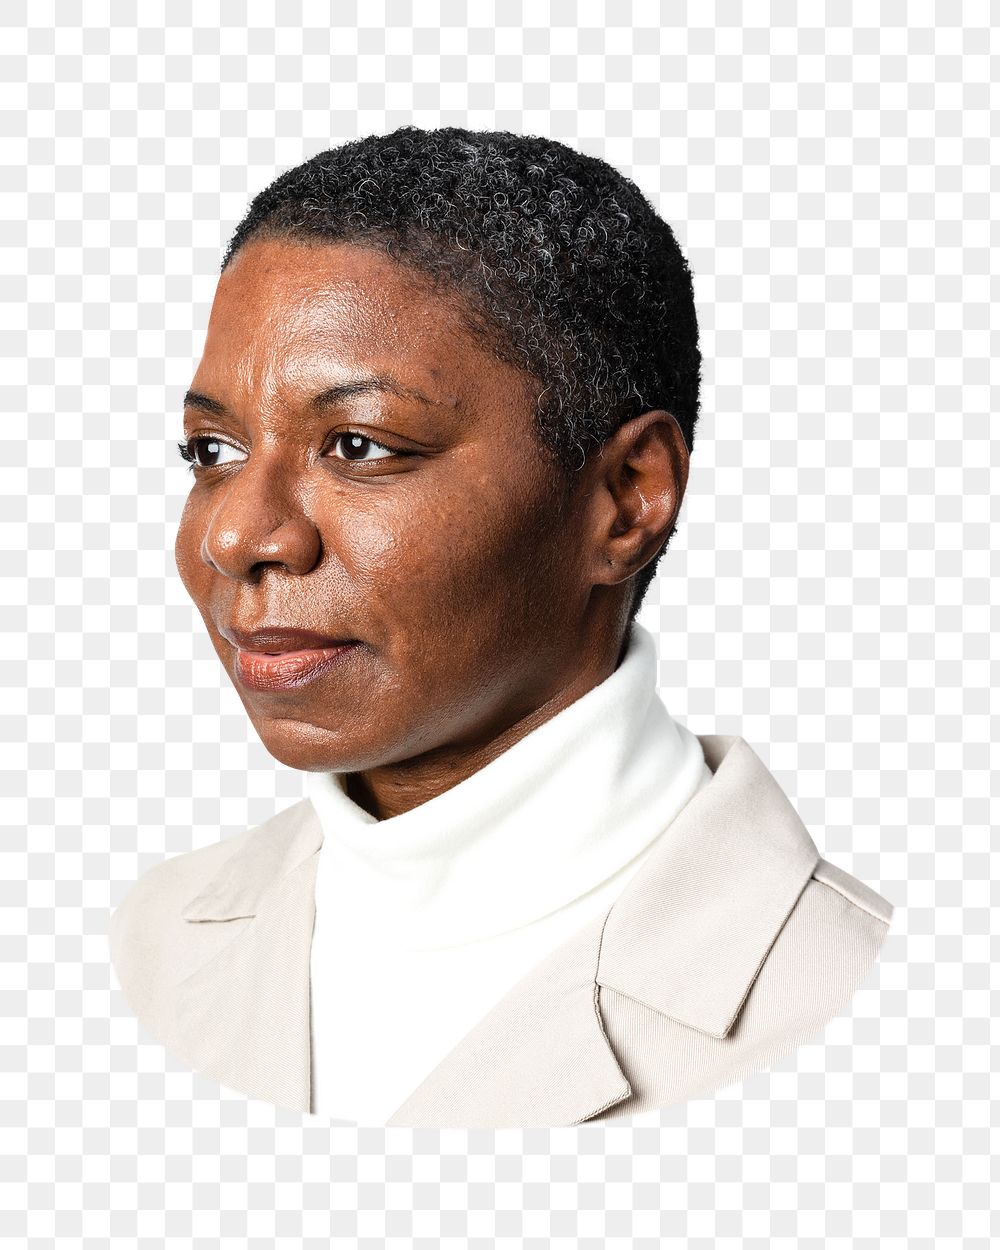 Png African American woman in beige shirt, side view, transparent background